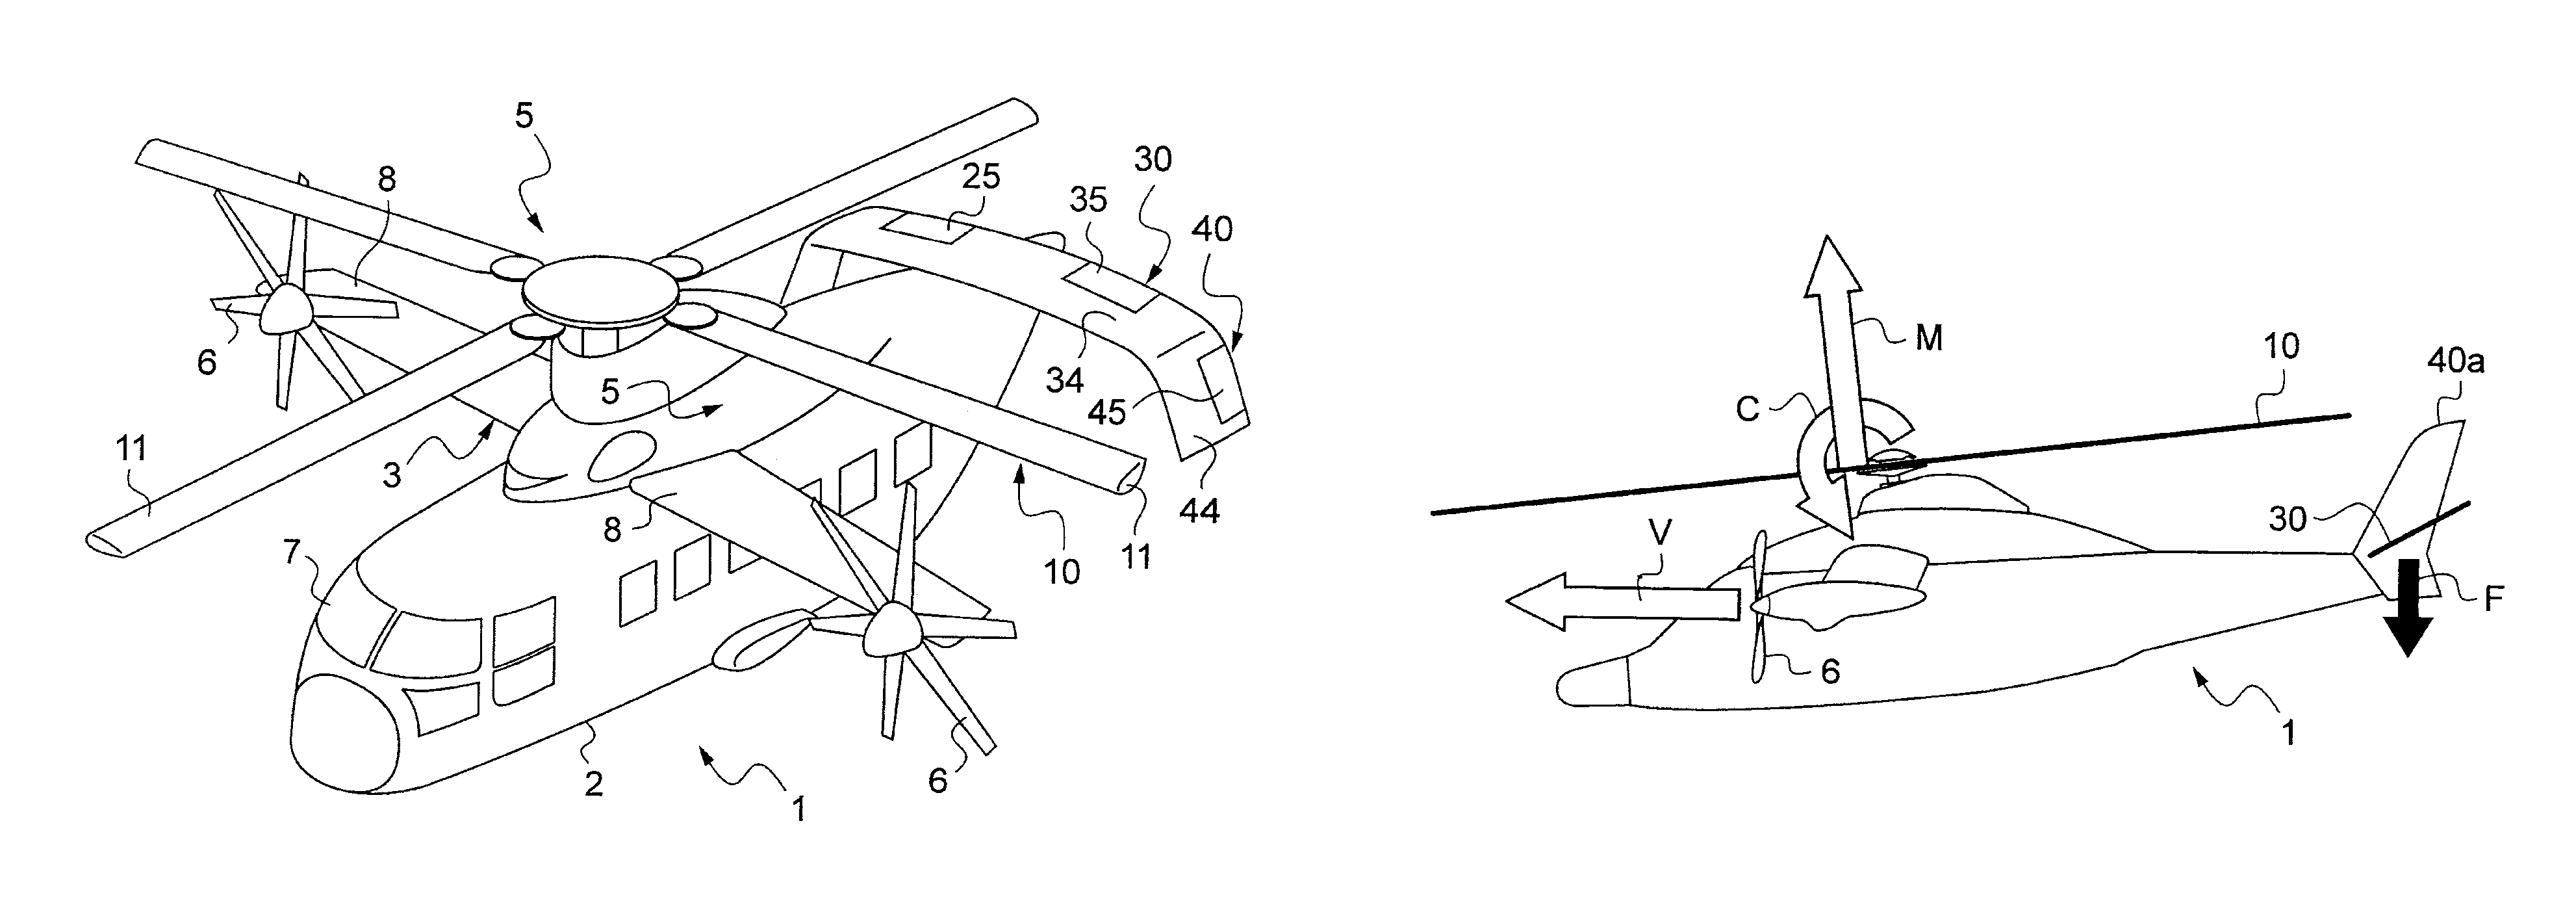 Method of controlling and regulating the deflection angle of a tailplane in a hybrid helicopter